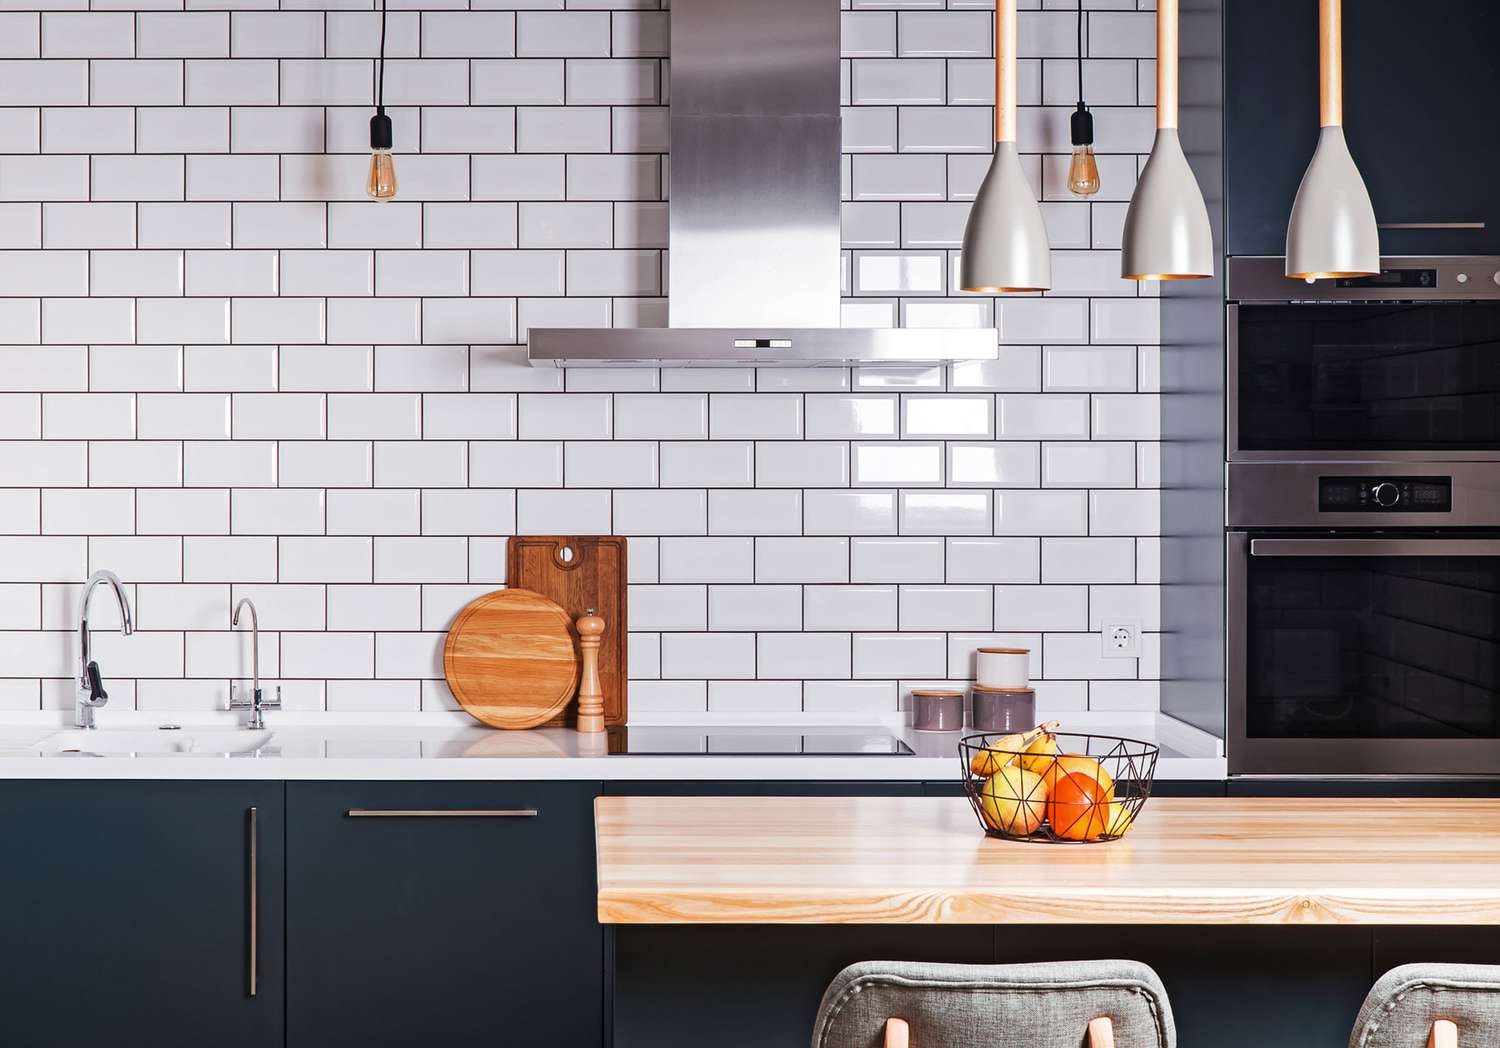 Kitchen Tile Backsplash Ideas You Need to See Right Now | Real Simple